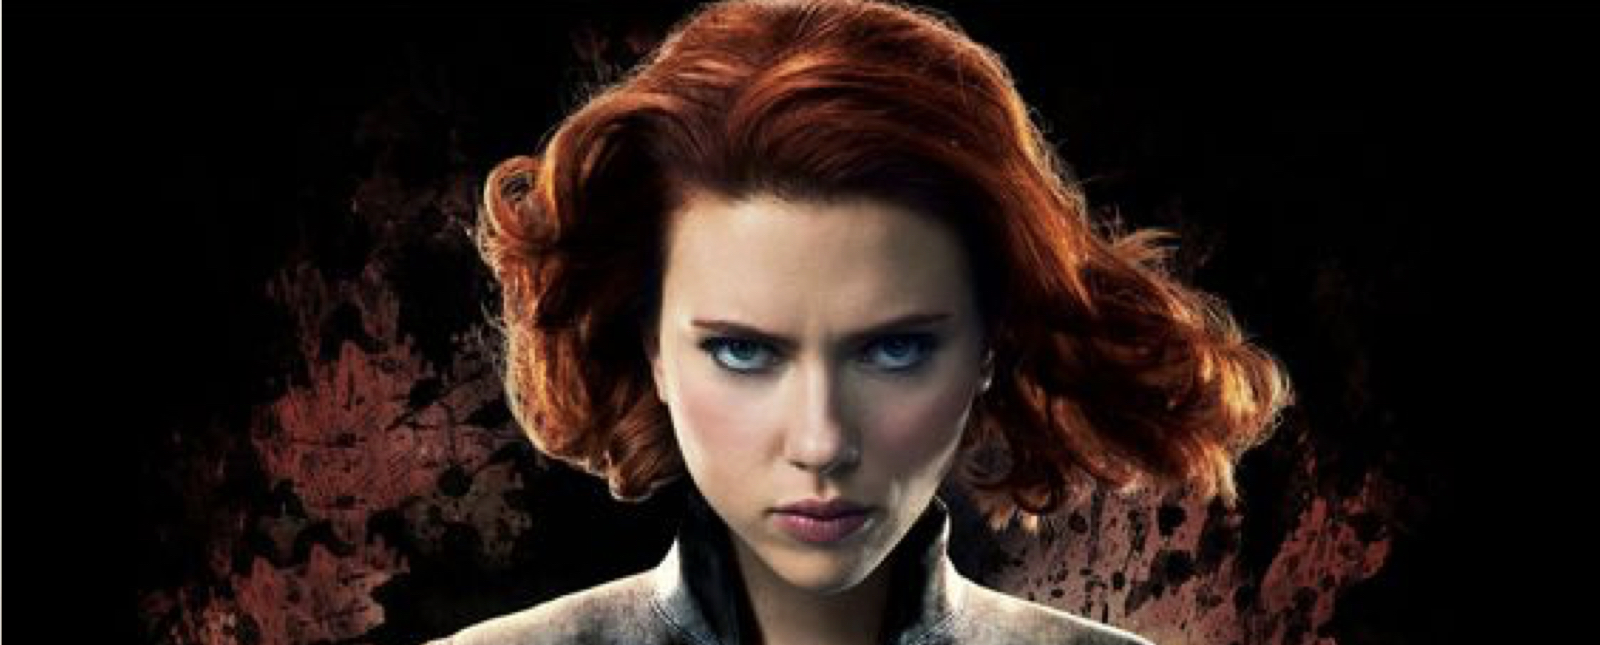 The teaser trailer for Black Widow explores the world of 